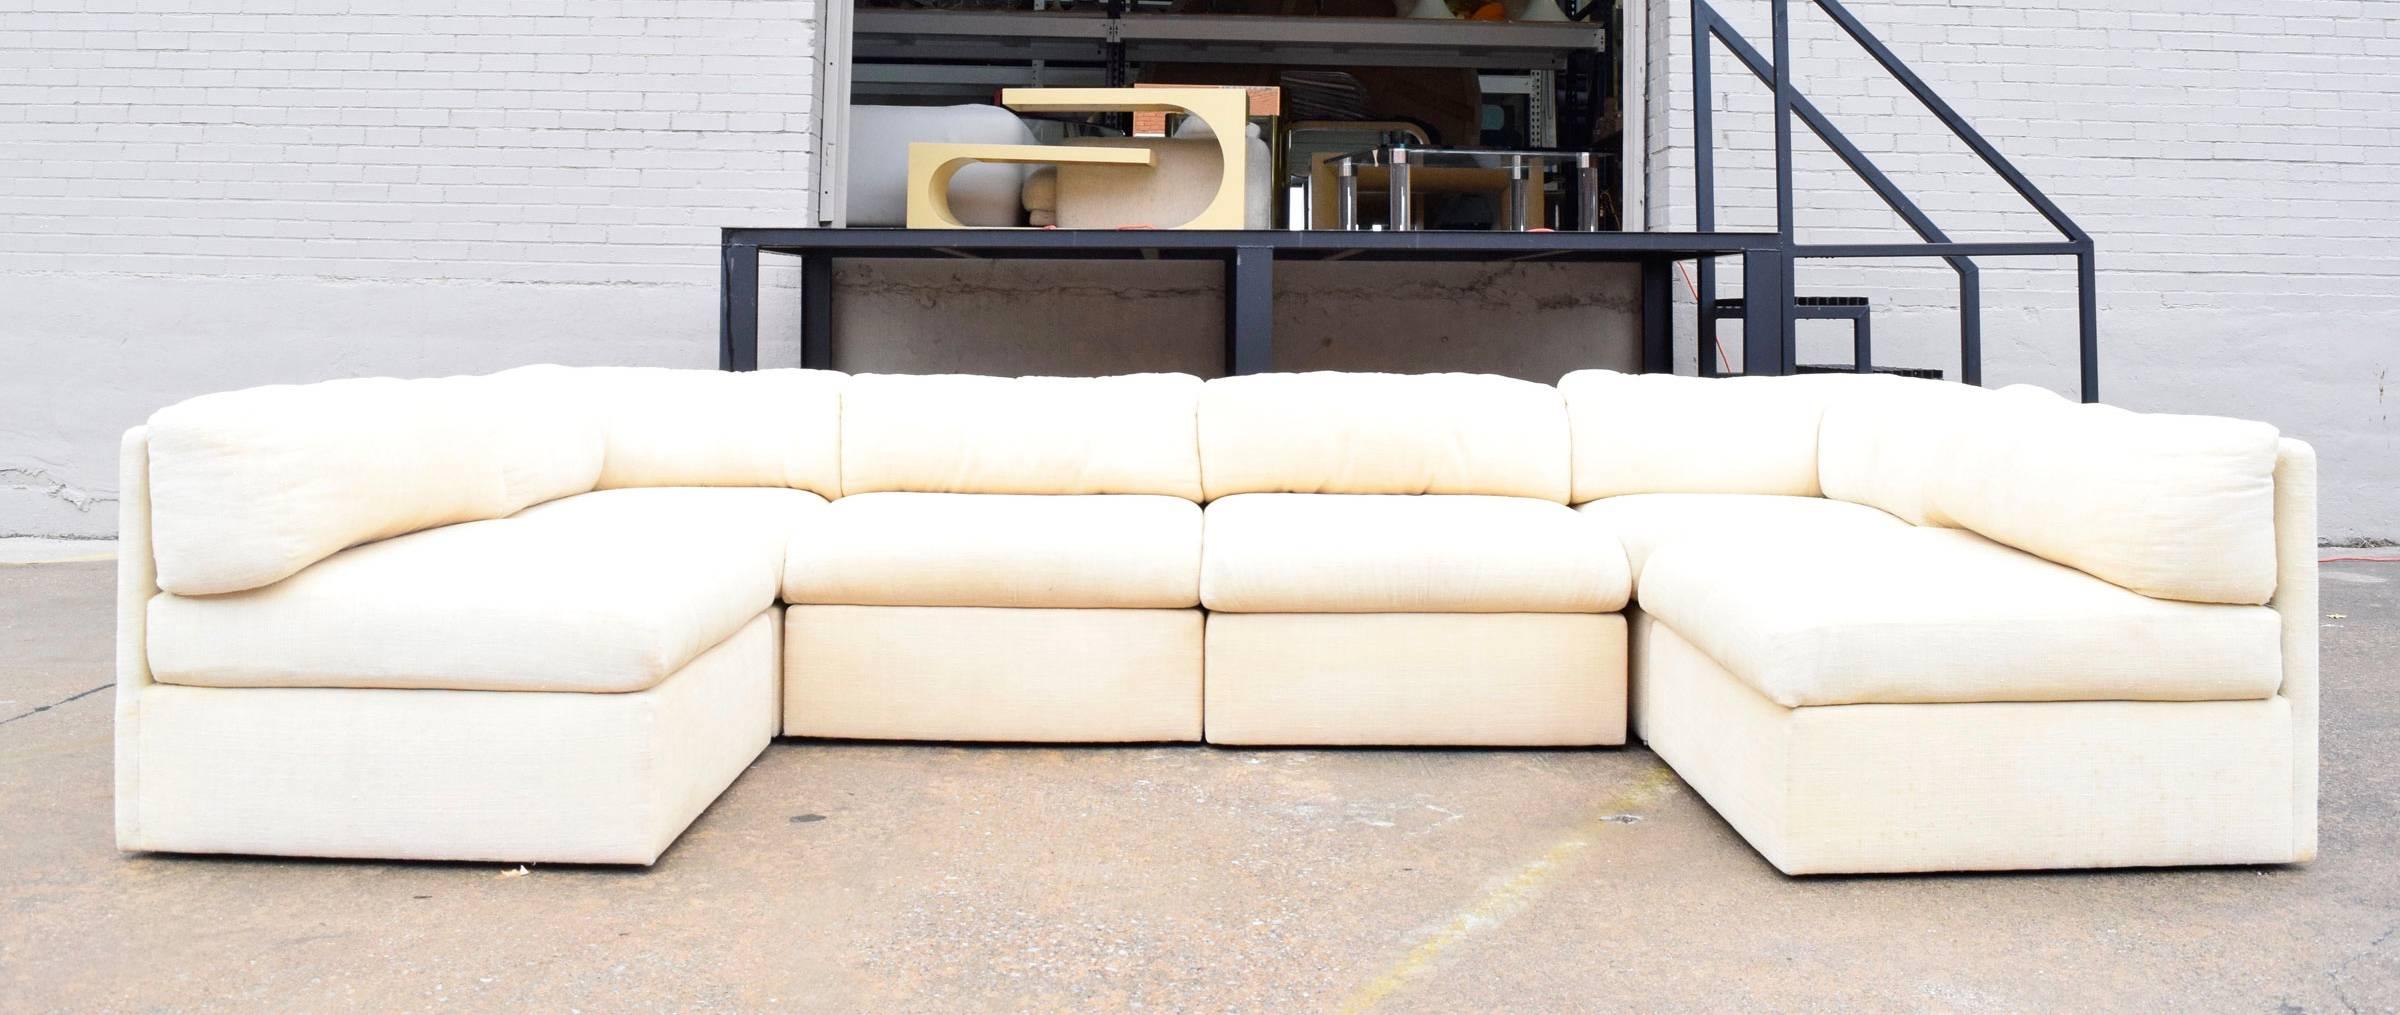 Six-piece modular sectional by Milo Baughman for Thayer Coggin. Two corner pieces are 32.5